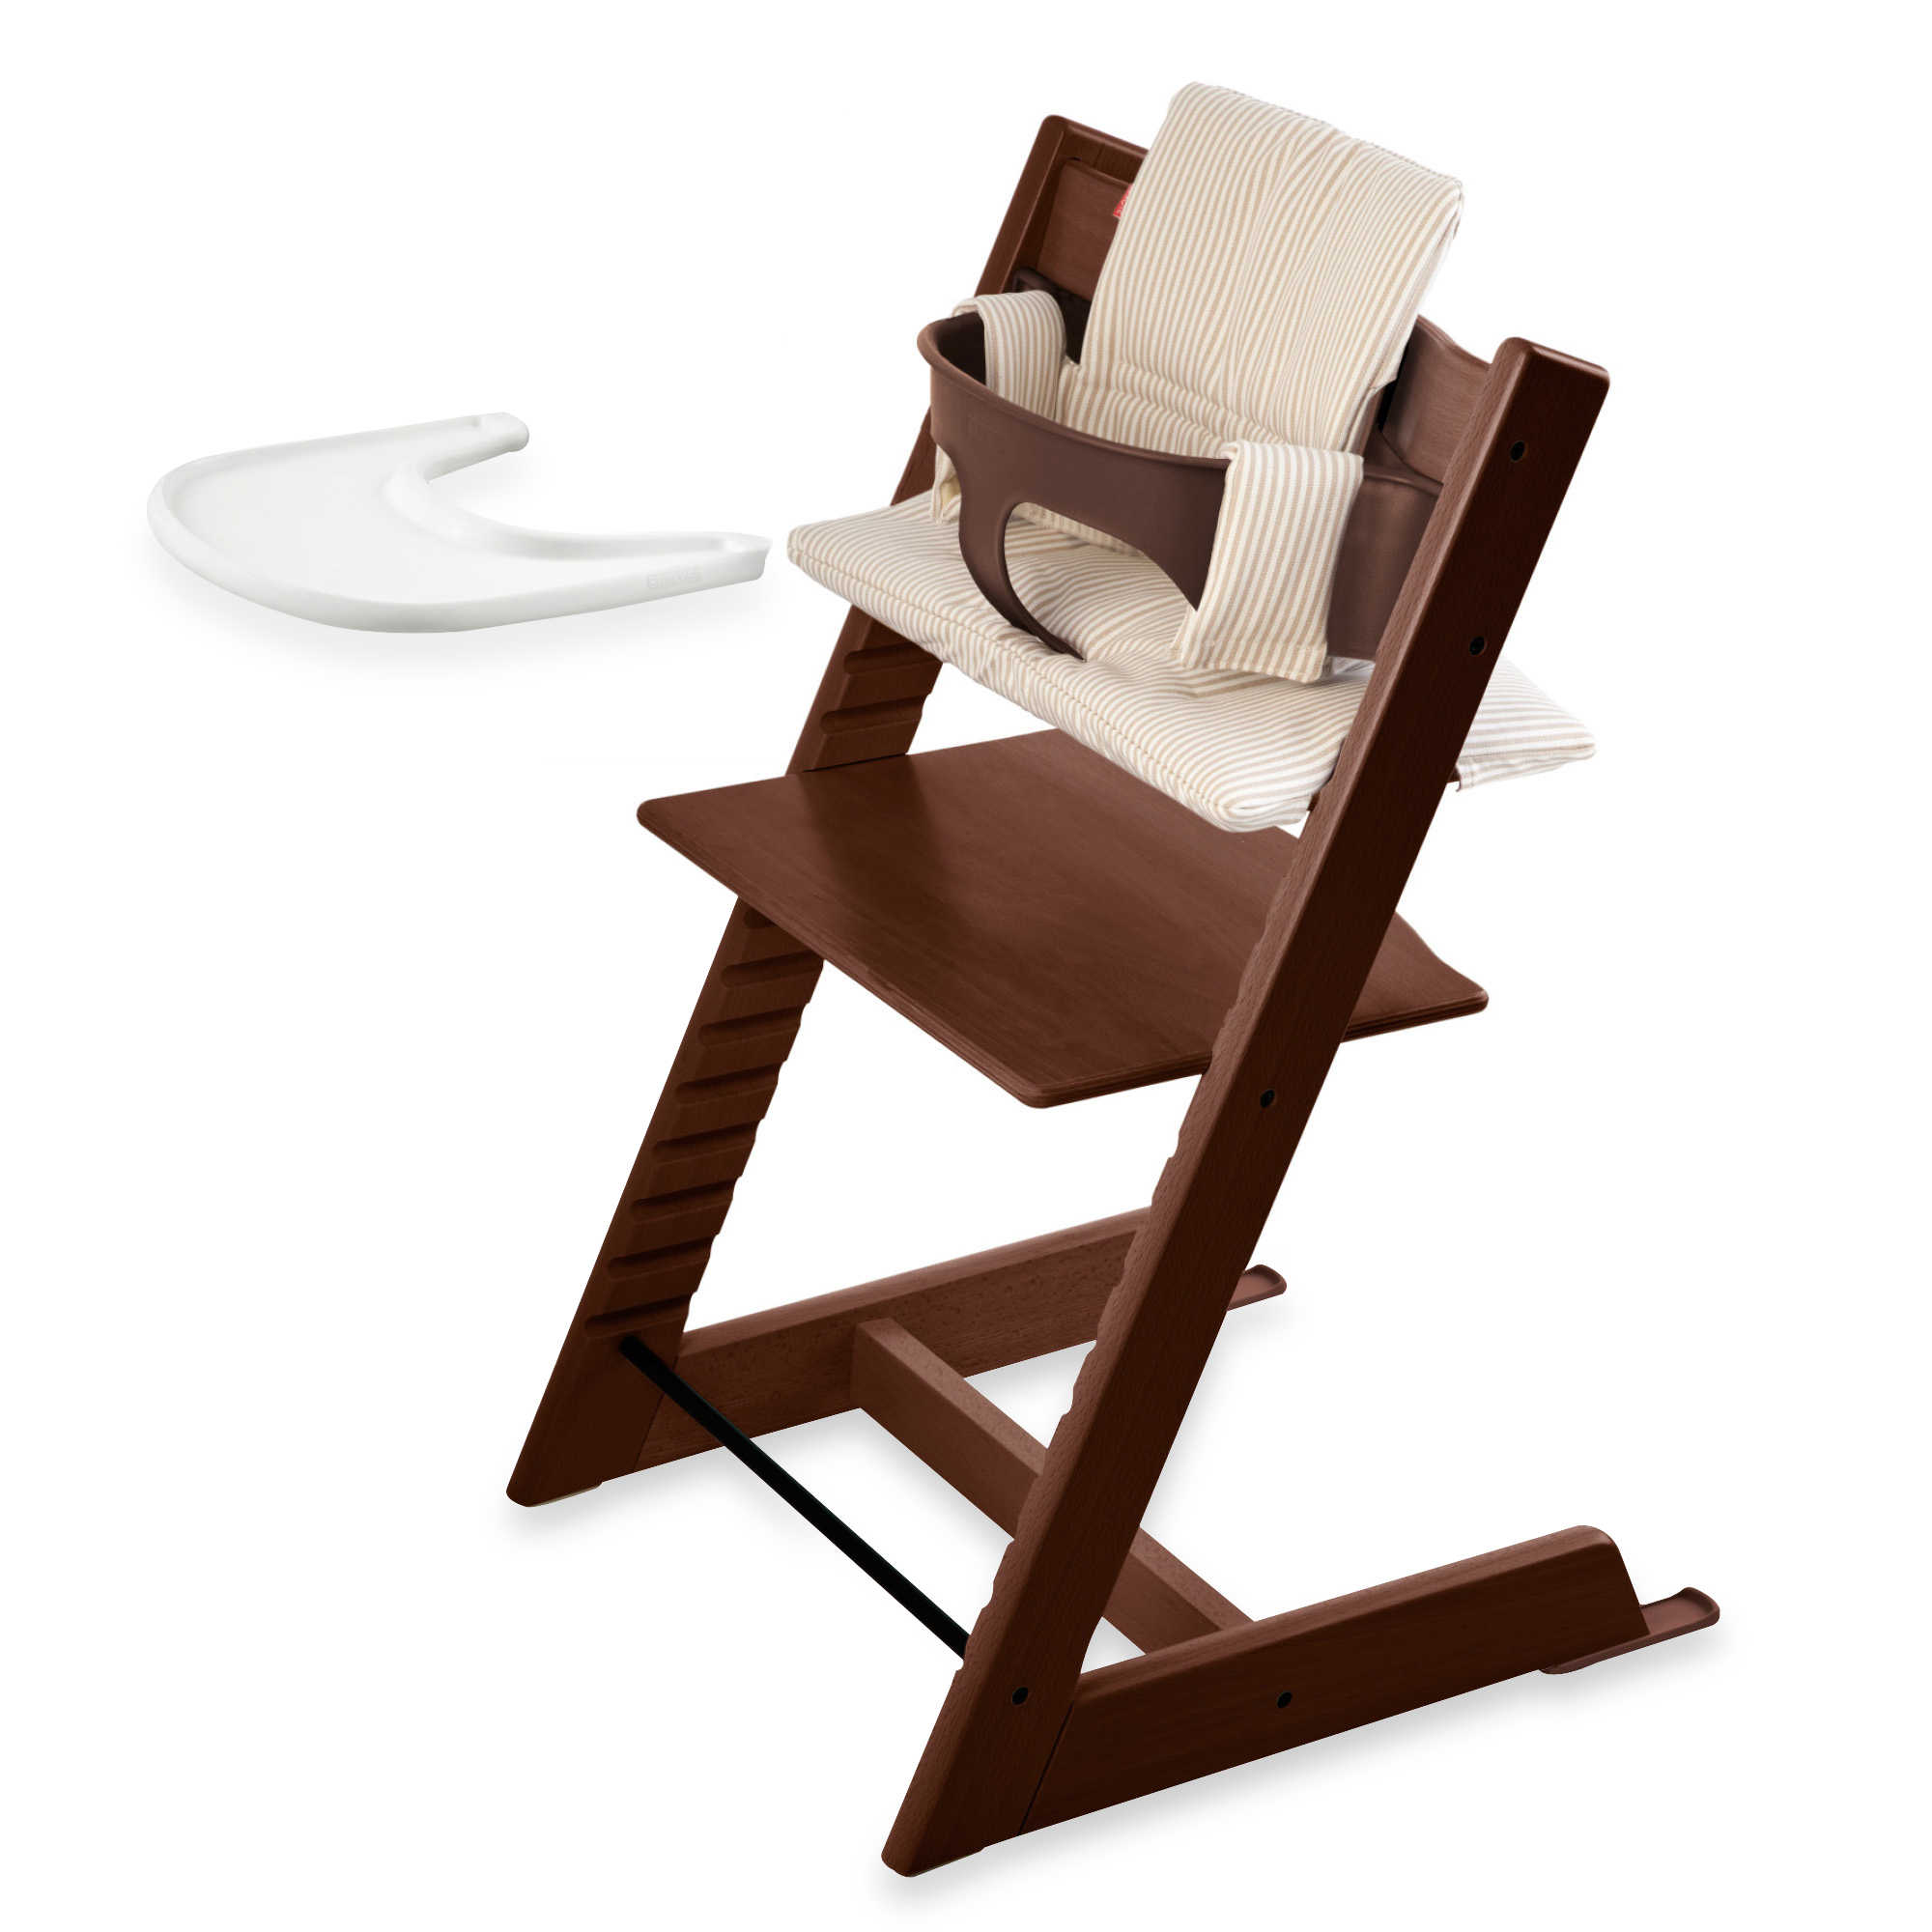 Wooden High Chair For Sale The Best Chair Review Blog